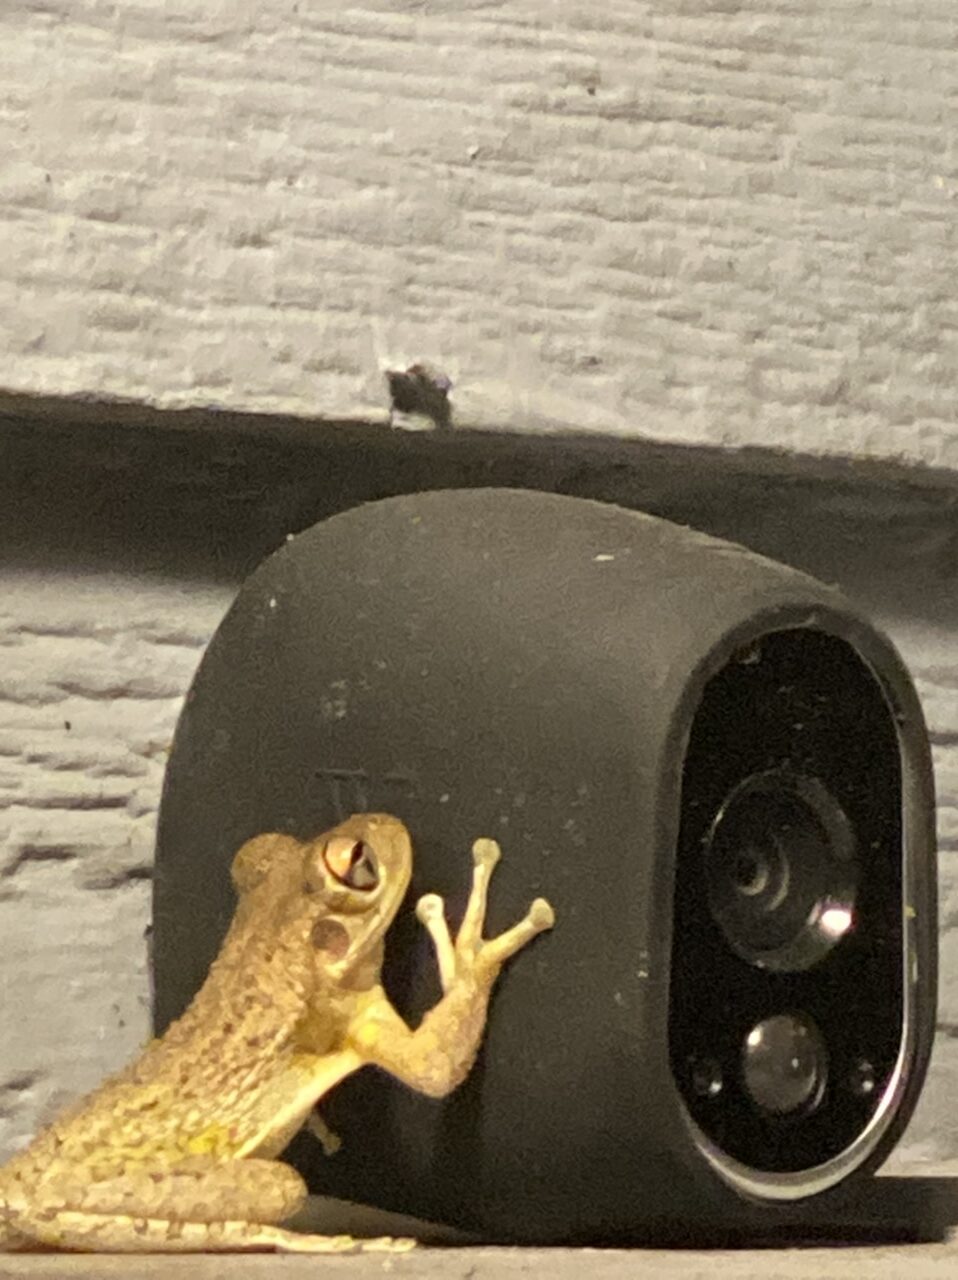 tree frog on security camera